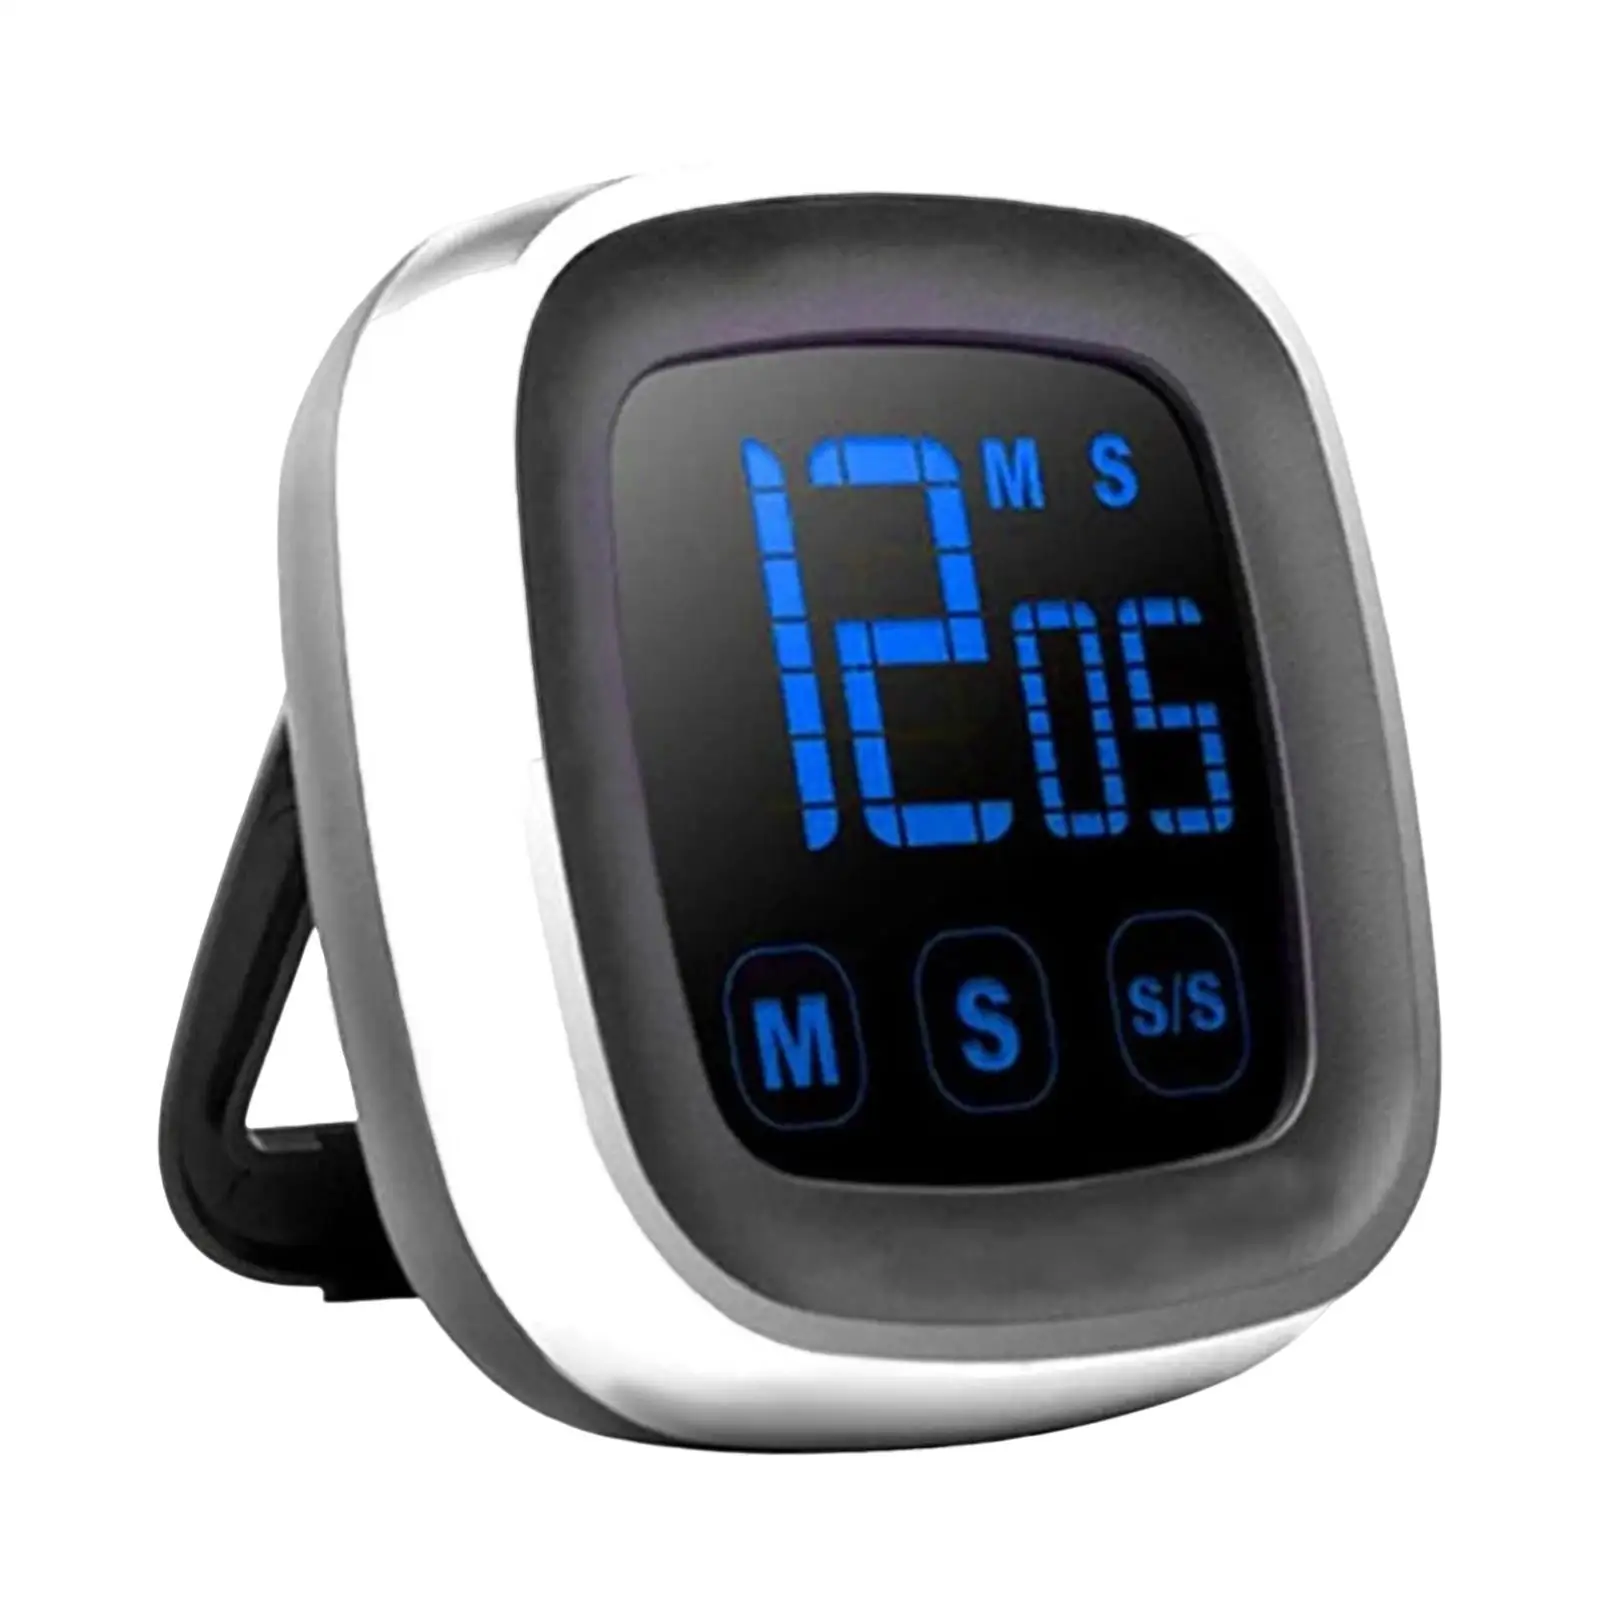 Kitchen Digital Timer Loud Easy for Cooking LED Clock Loud for Teaching